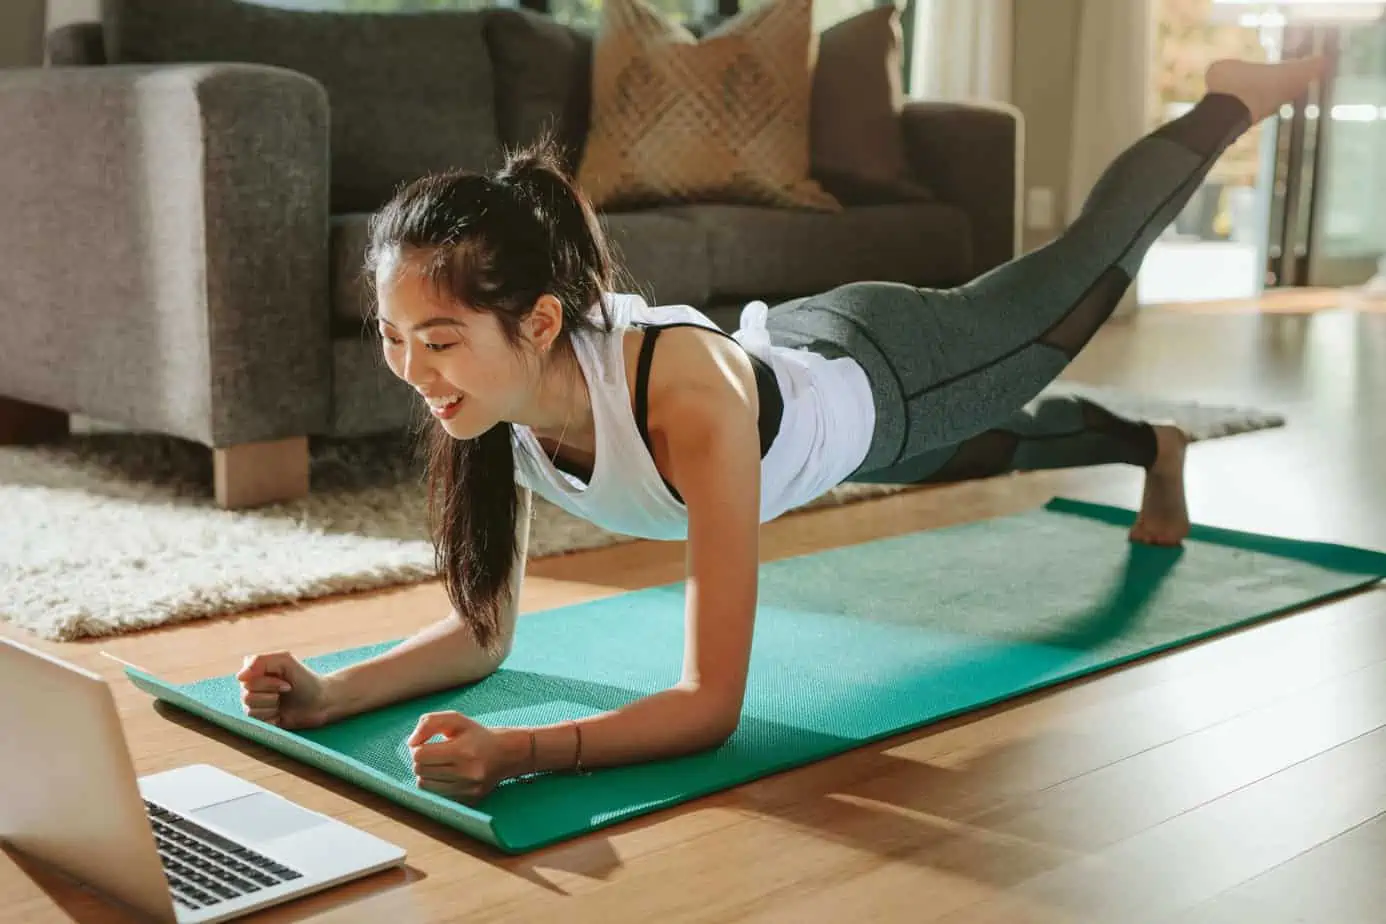 An Asian woman on a yoga mat, doing a workout with her computer in front of her.